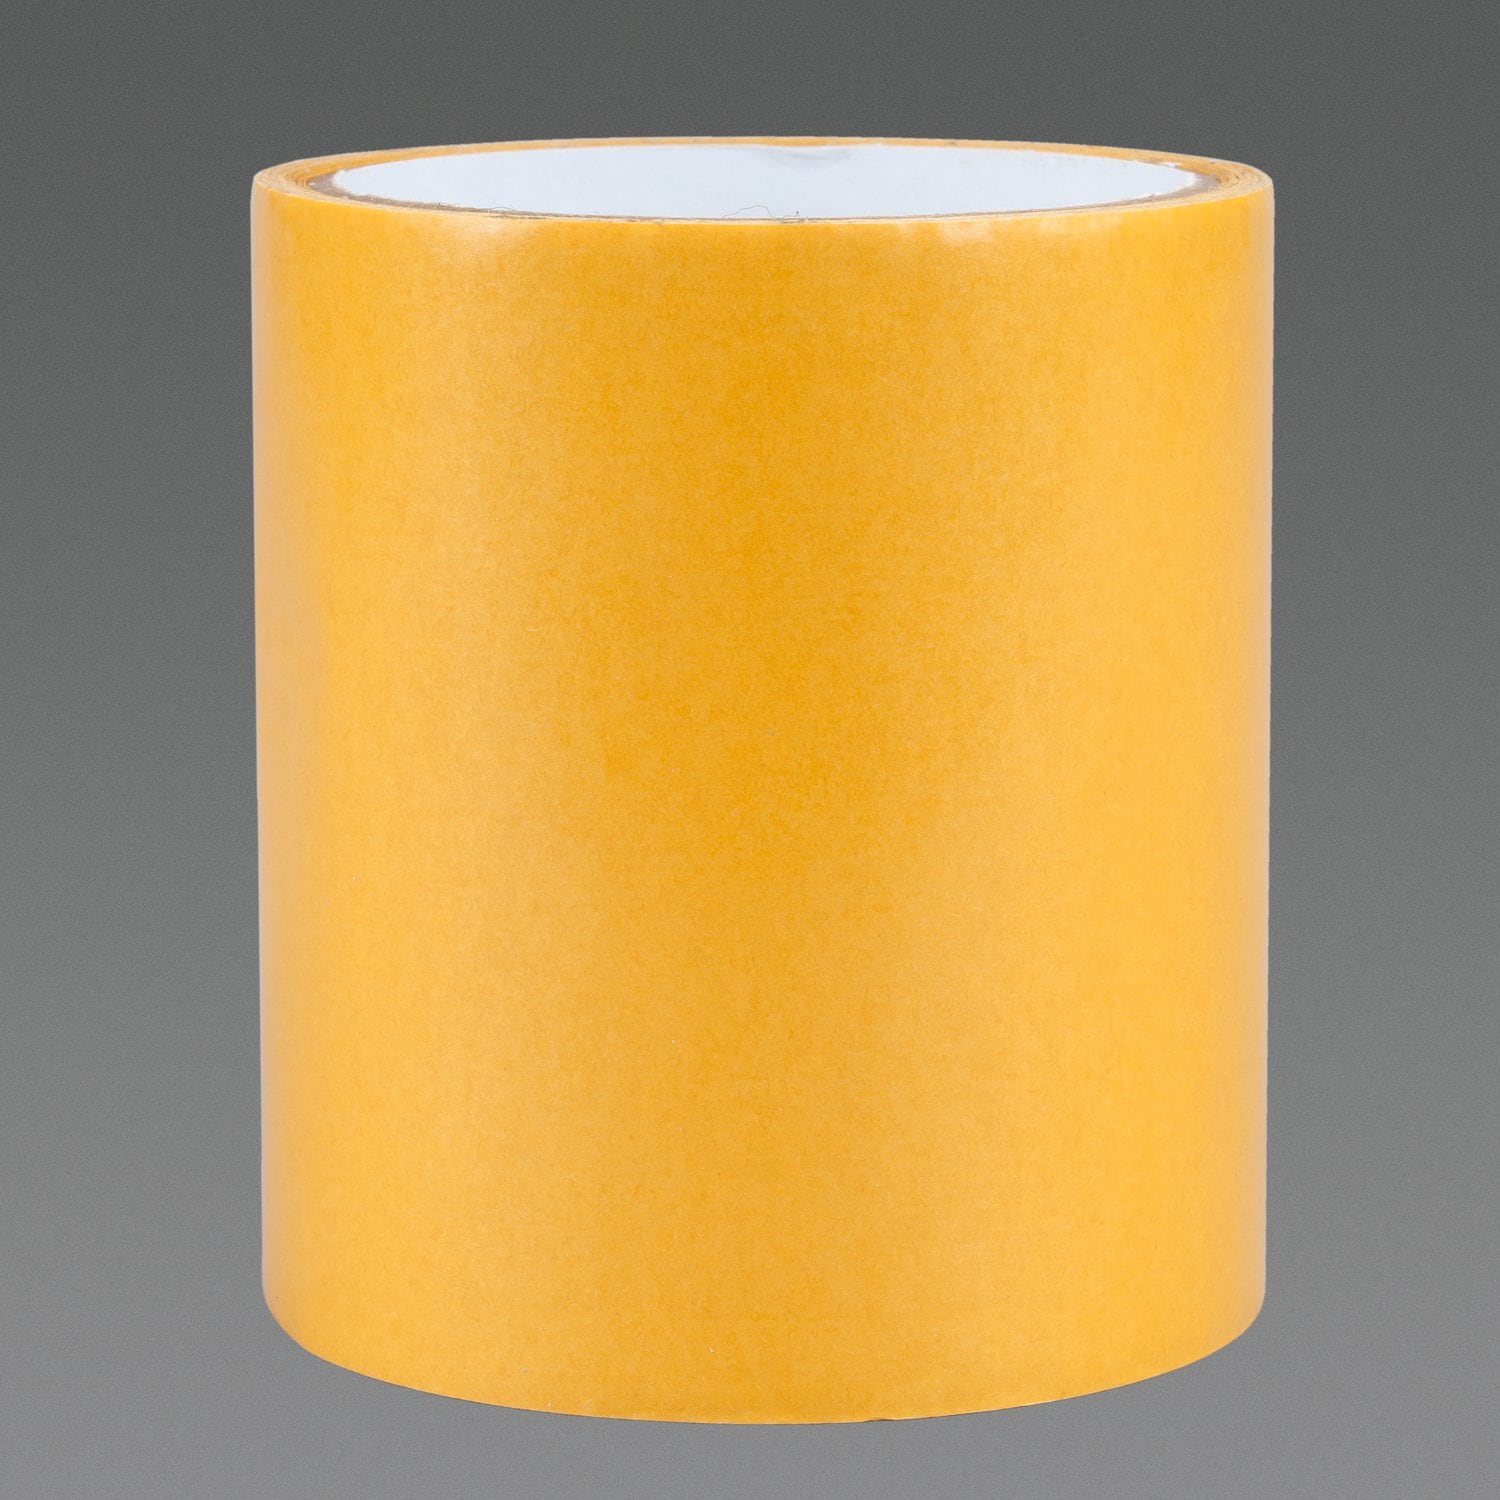 7010331866 - 3M Scrim Reinforced Adhesive Transfer Adhesive 97053, 54 in x 650 yd,
2.5 mil, 1 roll per case